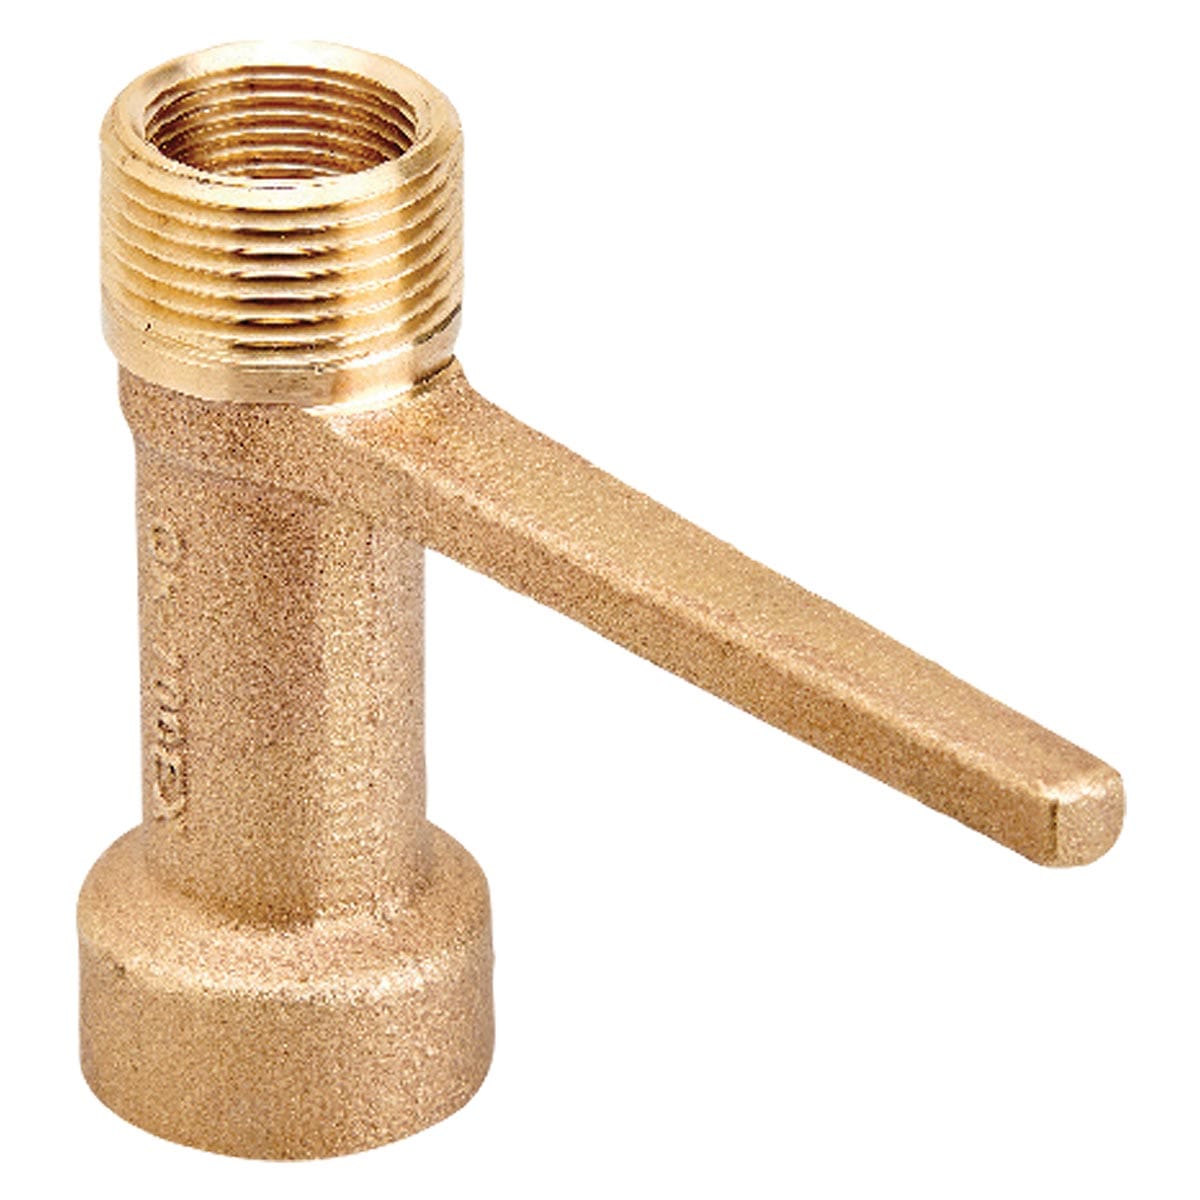 Underhill Quick Coupler Extender Key for 1" Quick Couplers